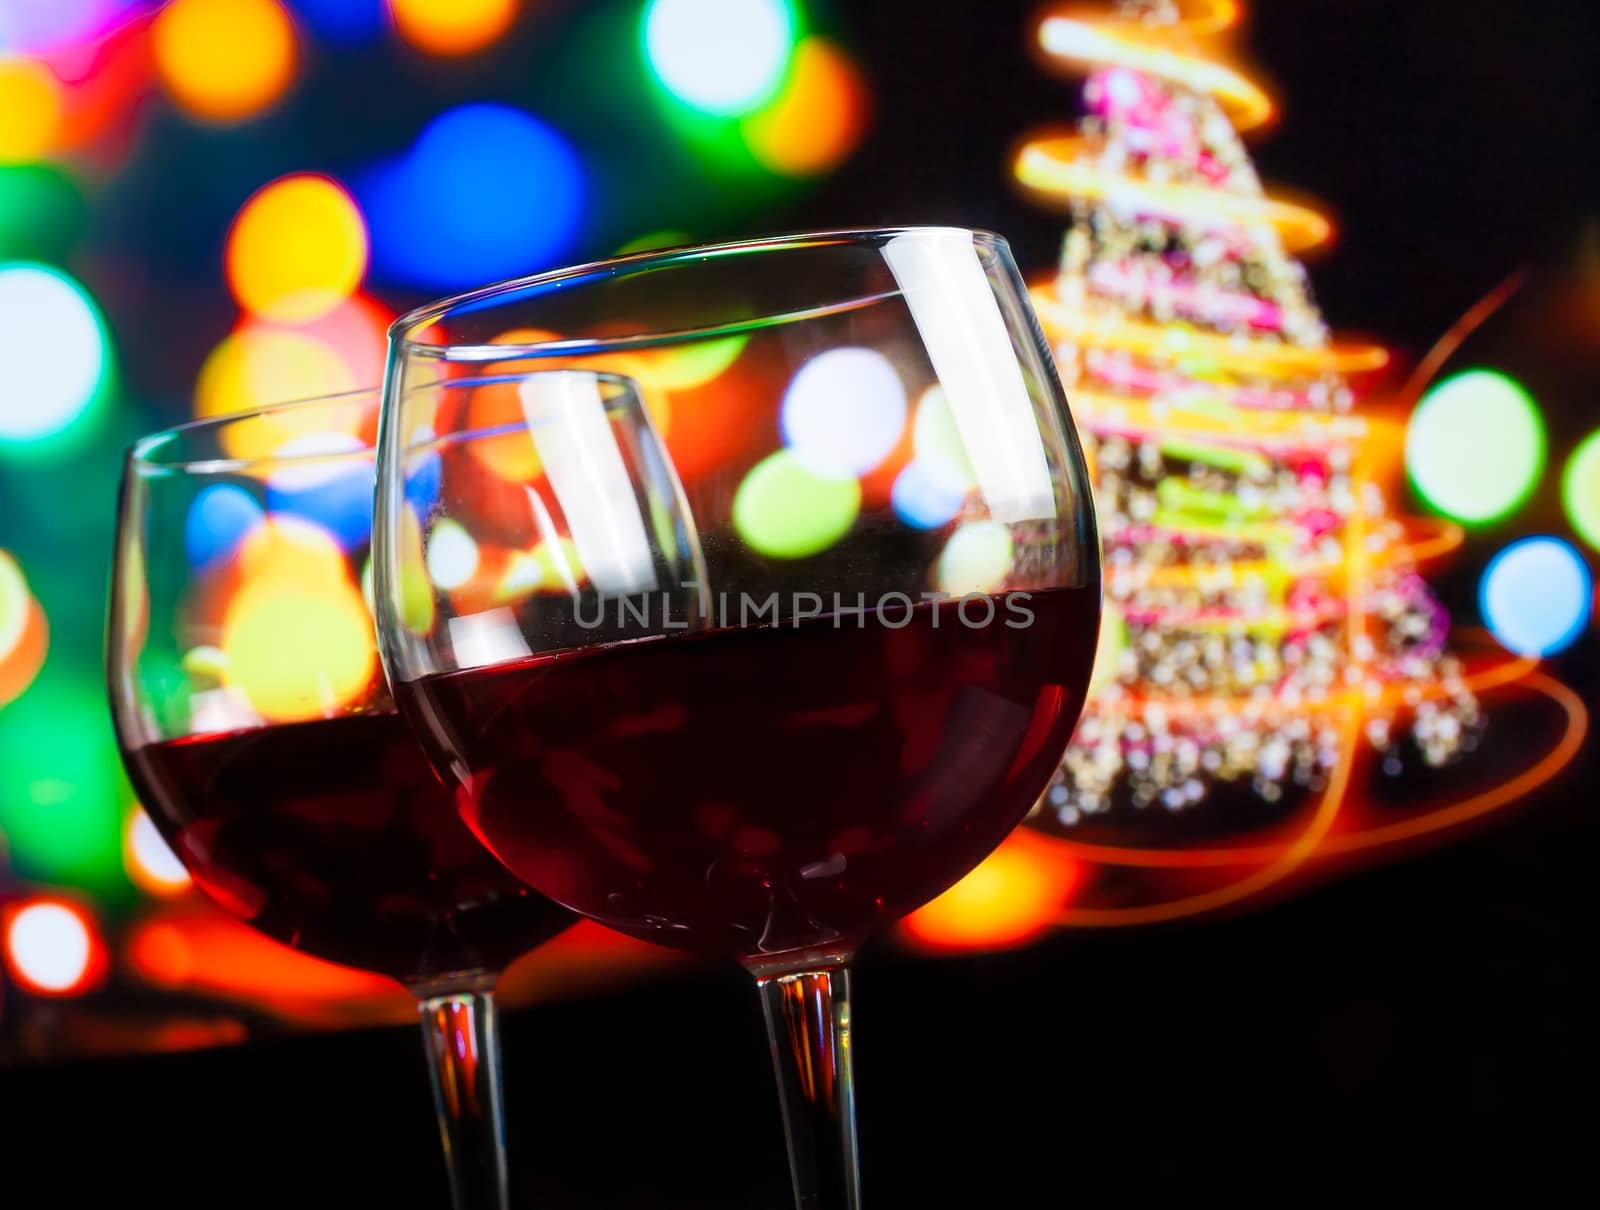 red wine glass against bokeh lights tree background by donfiore